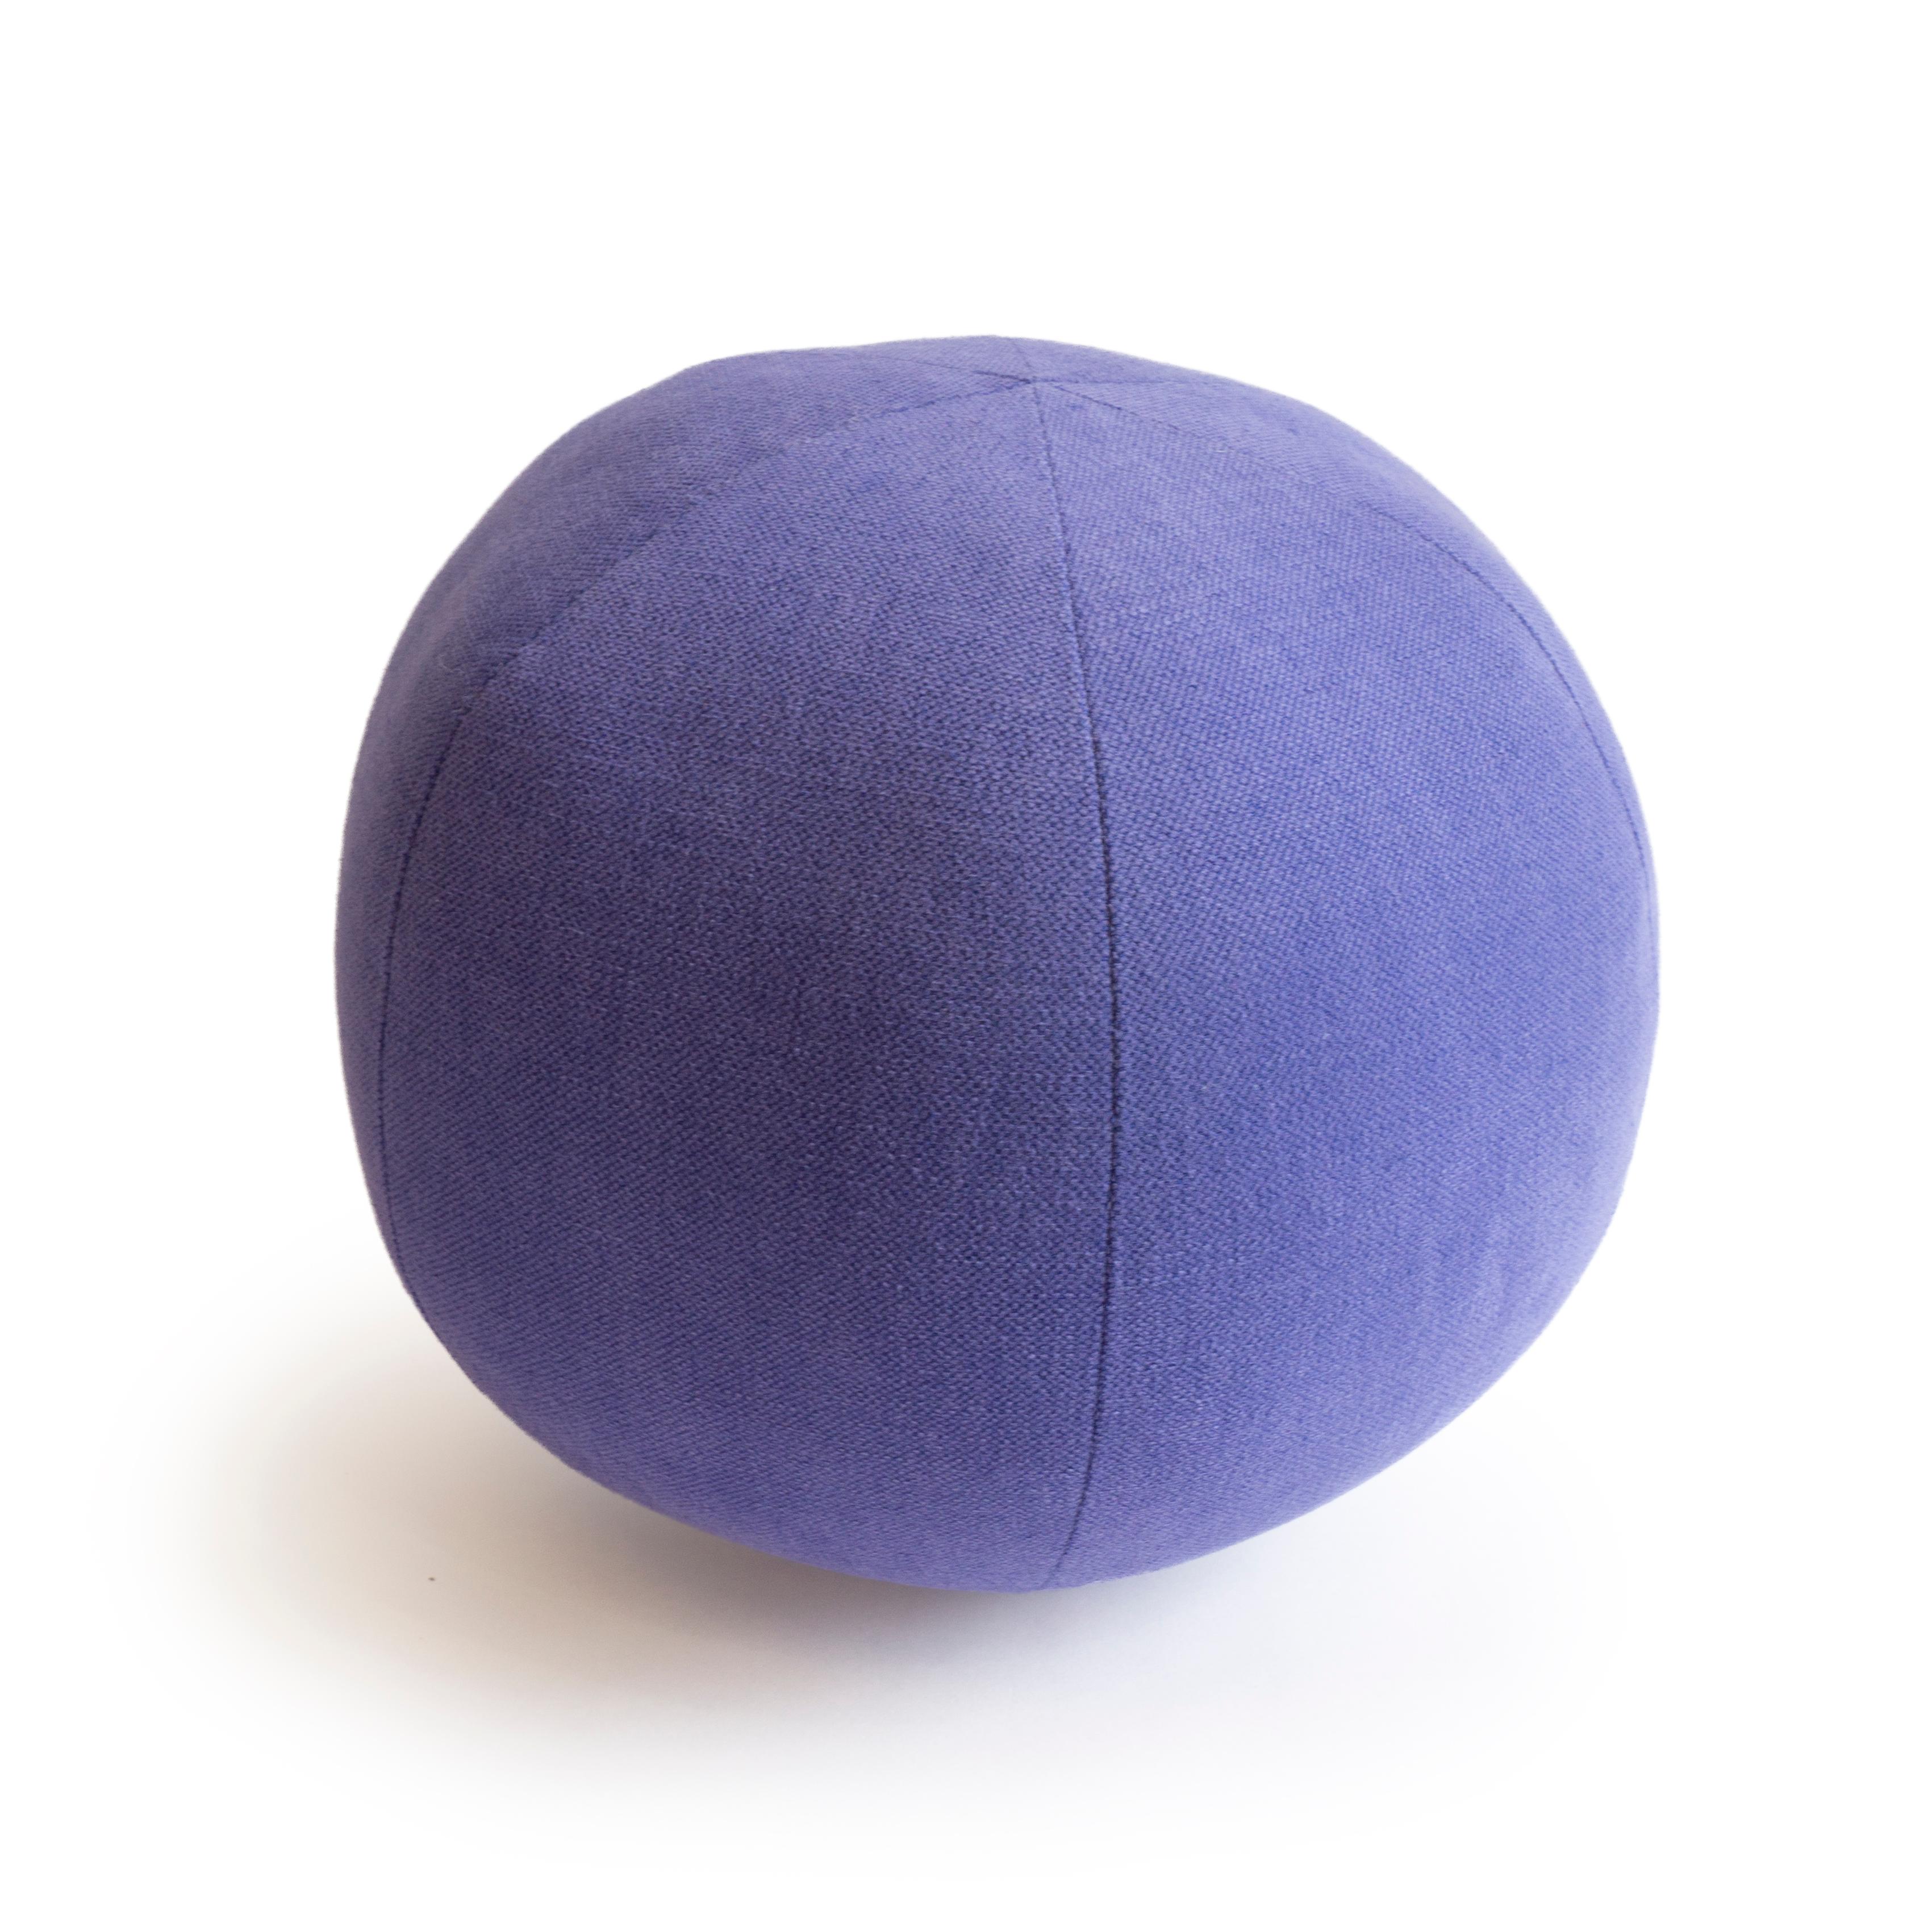 This is a hand sewn round ball throw pillow in a purple fabric. All pillows are handmade at our studio in Norwalk, Connecticut. 

Measurements: 9